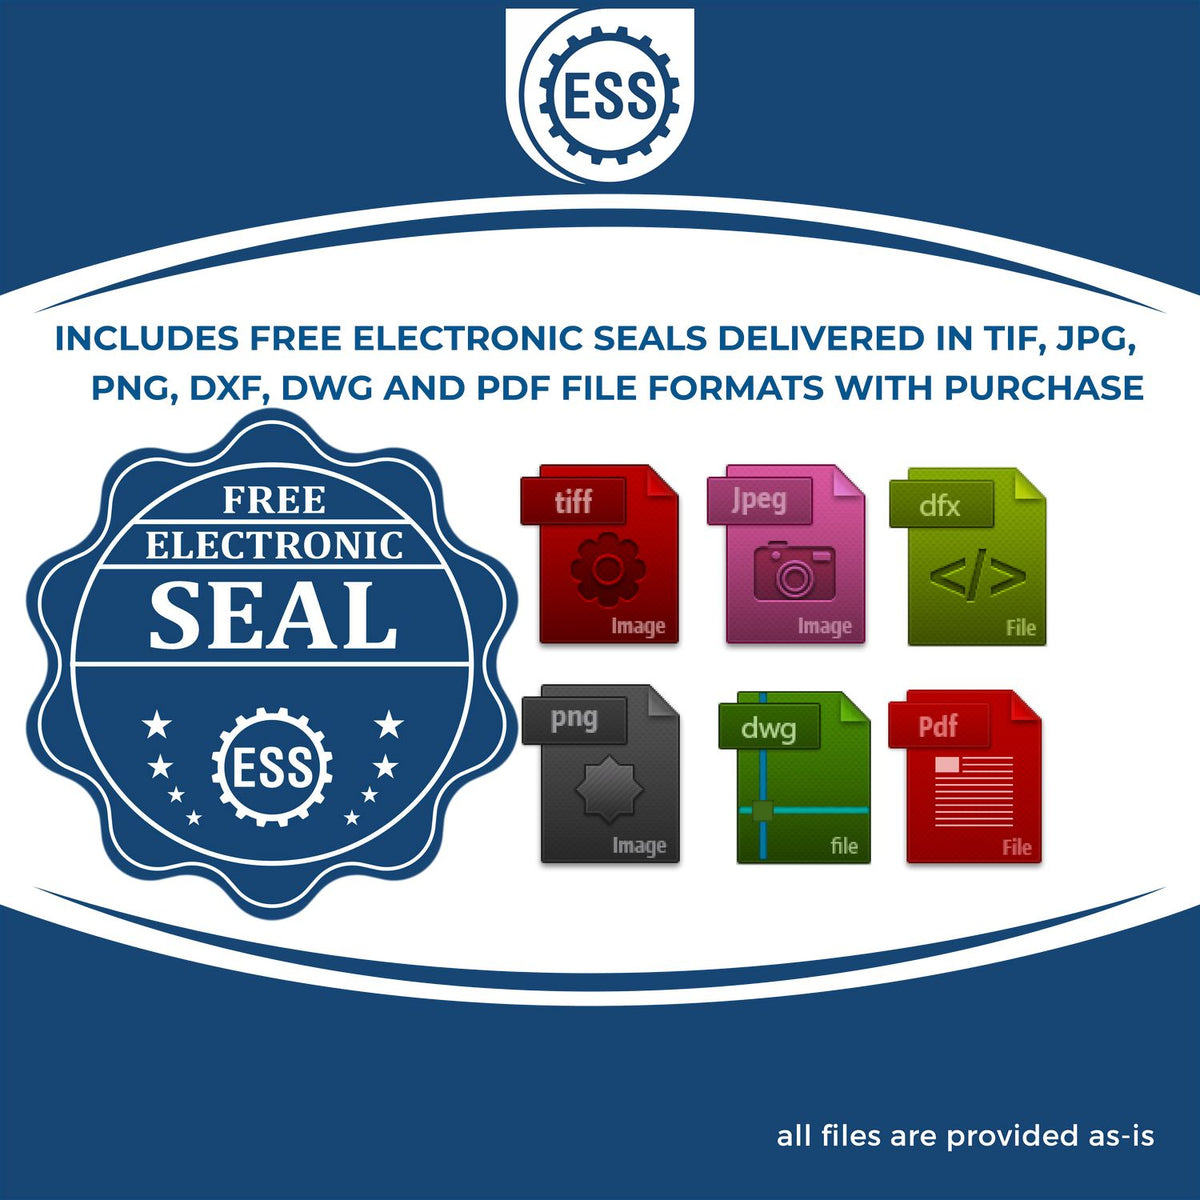 An infographic for the free electronic seal for the State of Maine Extended Long Reach Engineer Seal illustrating the different file type icons such as DXF, DWG, TIF, JPG and PNG.